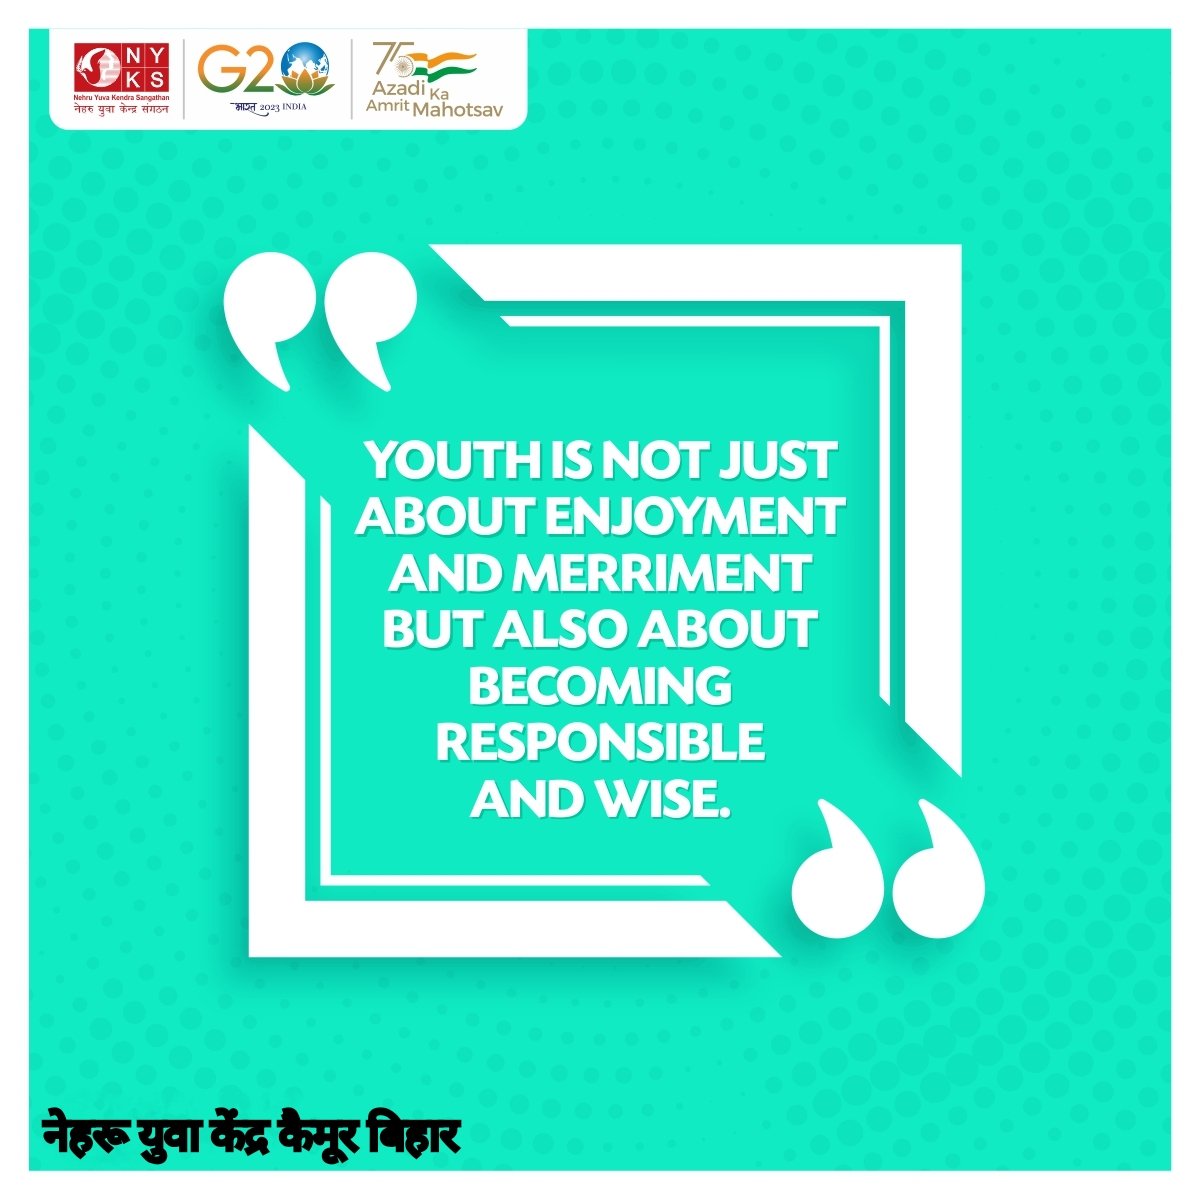 Quote of the Day!

Youth is not just about enjoyment and merriment but also about becoming responsible and wise.

#Quote #thoughtoftheday #thursdayvibes #YuvaUtsav2023 #NyksYuvaUtsav